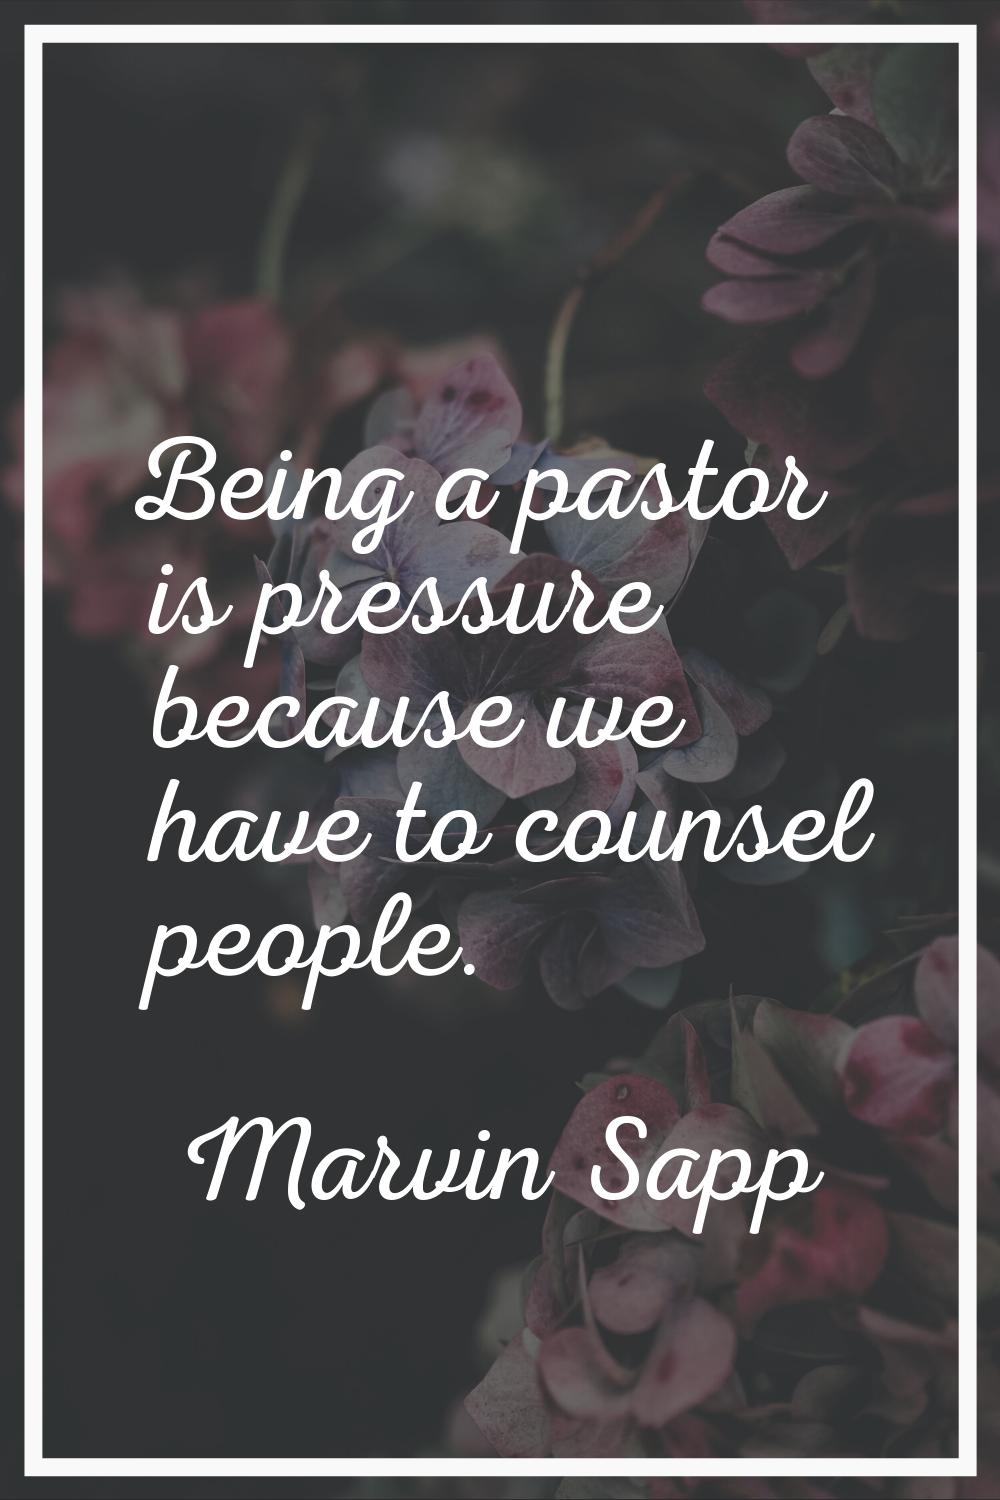 Being a pastor is pressure because we have to counsel people.